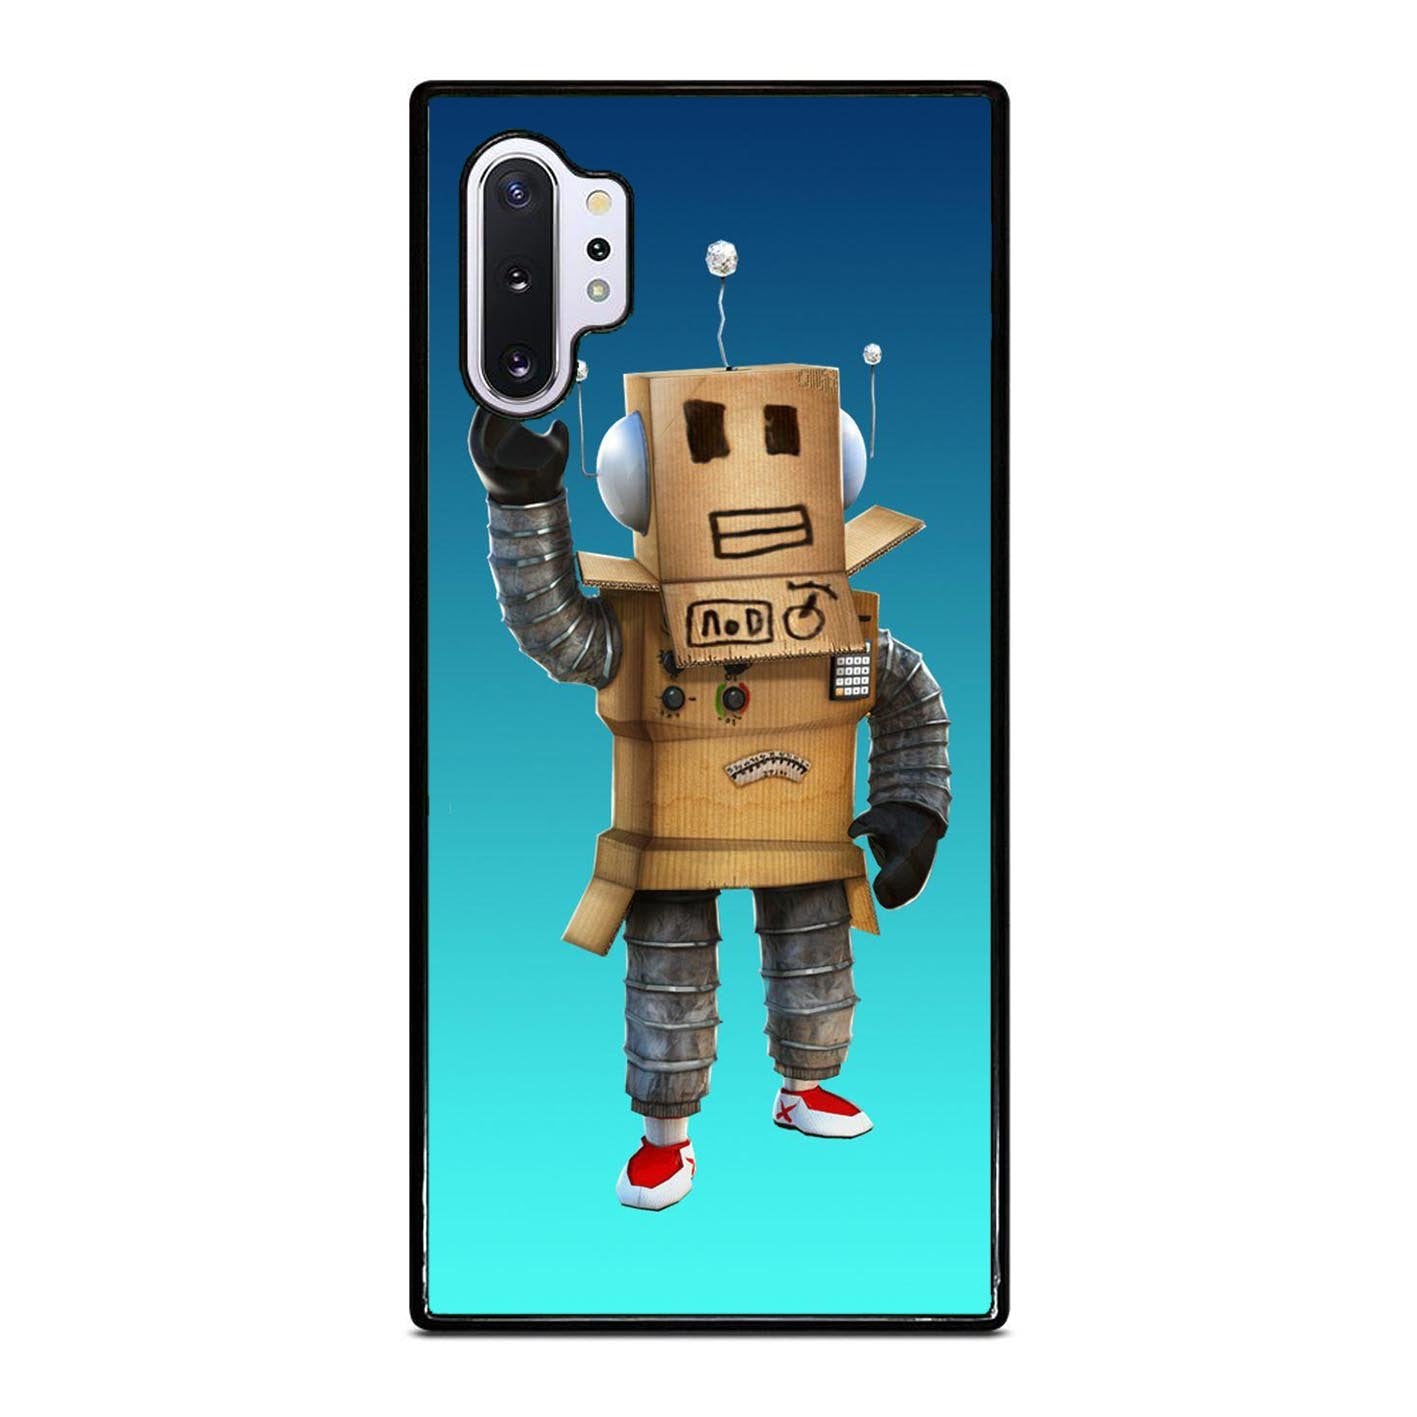 Roblox 118 Samsung Galaxy Note 10 Plus Case Iphone And Android Teecustom - galaxy robot roblox